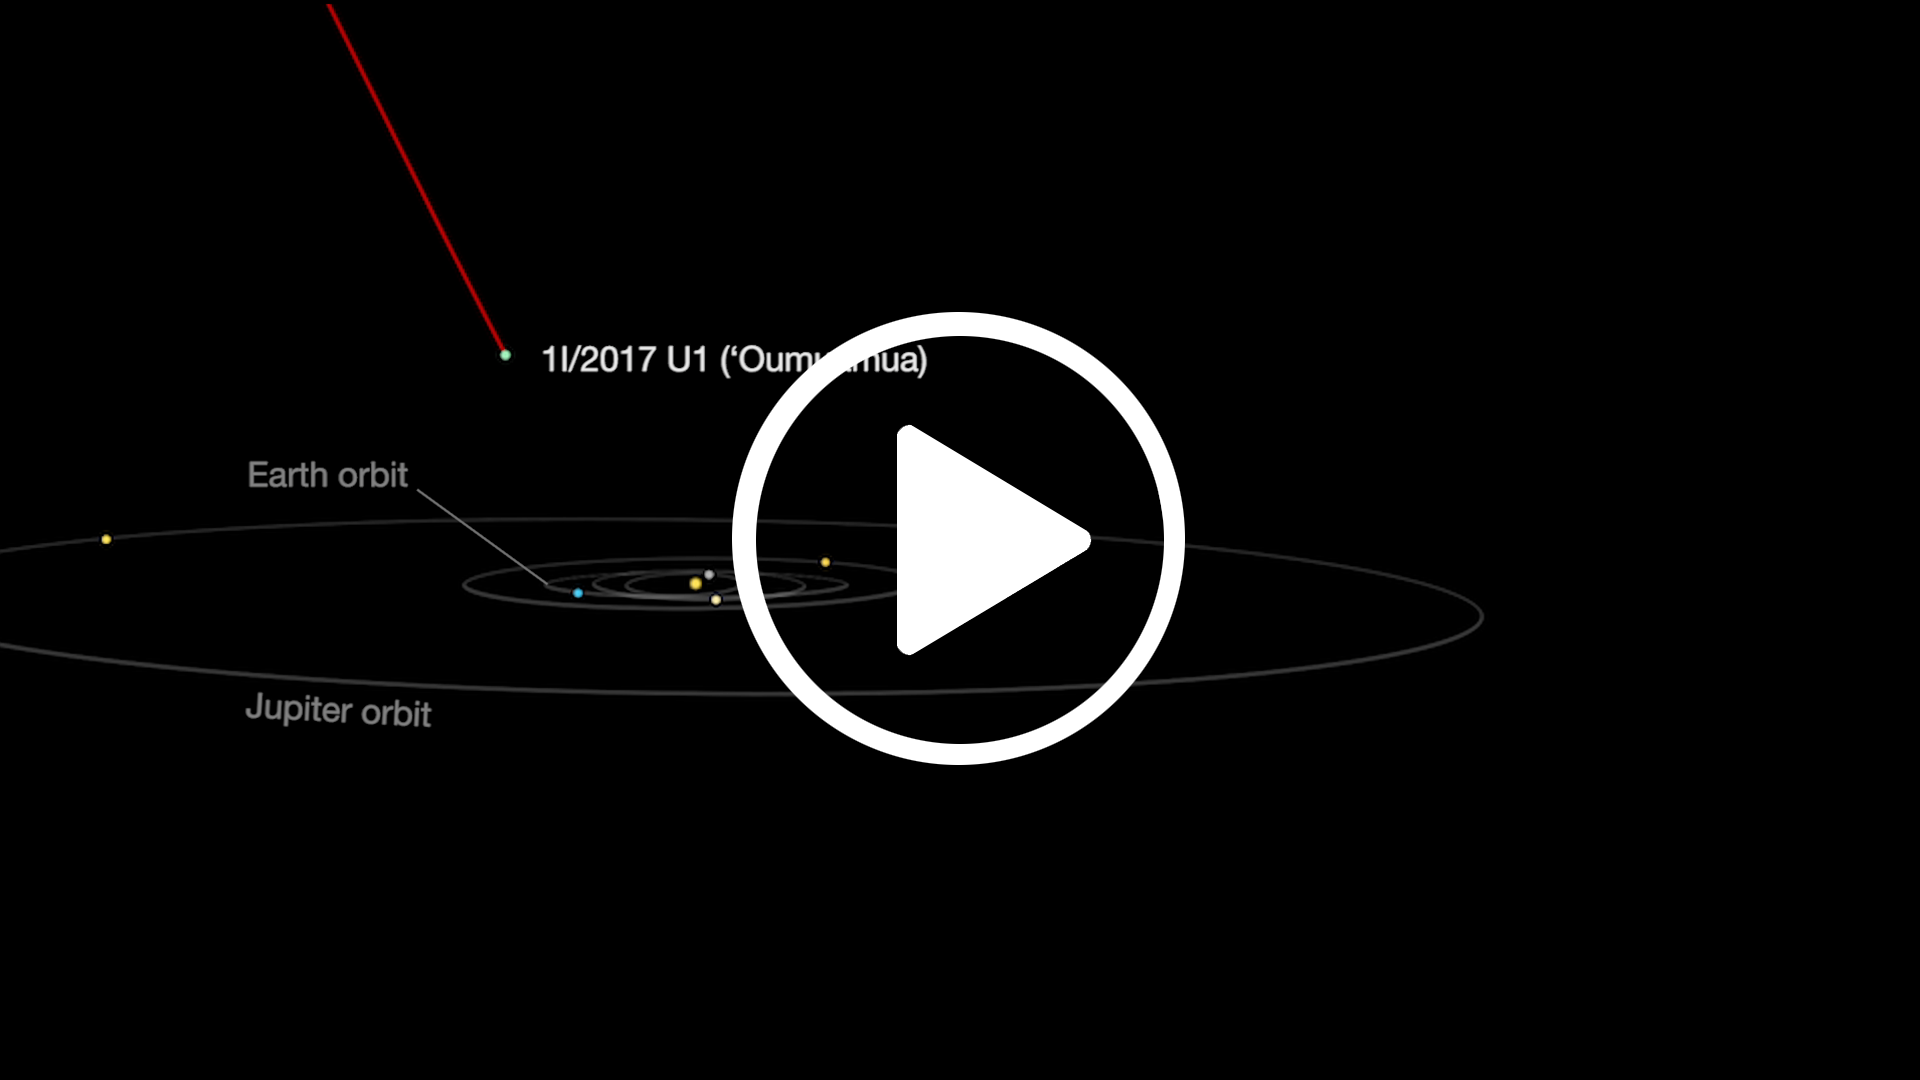 animation shows the path of `Oumuamua as it passed through the inner solar system